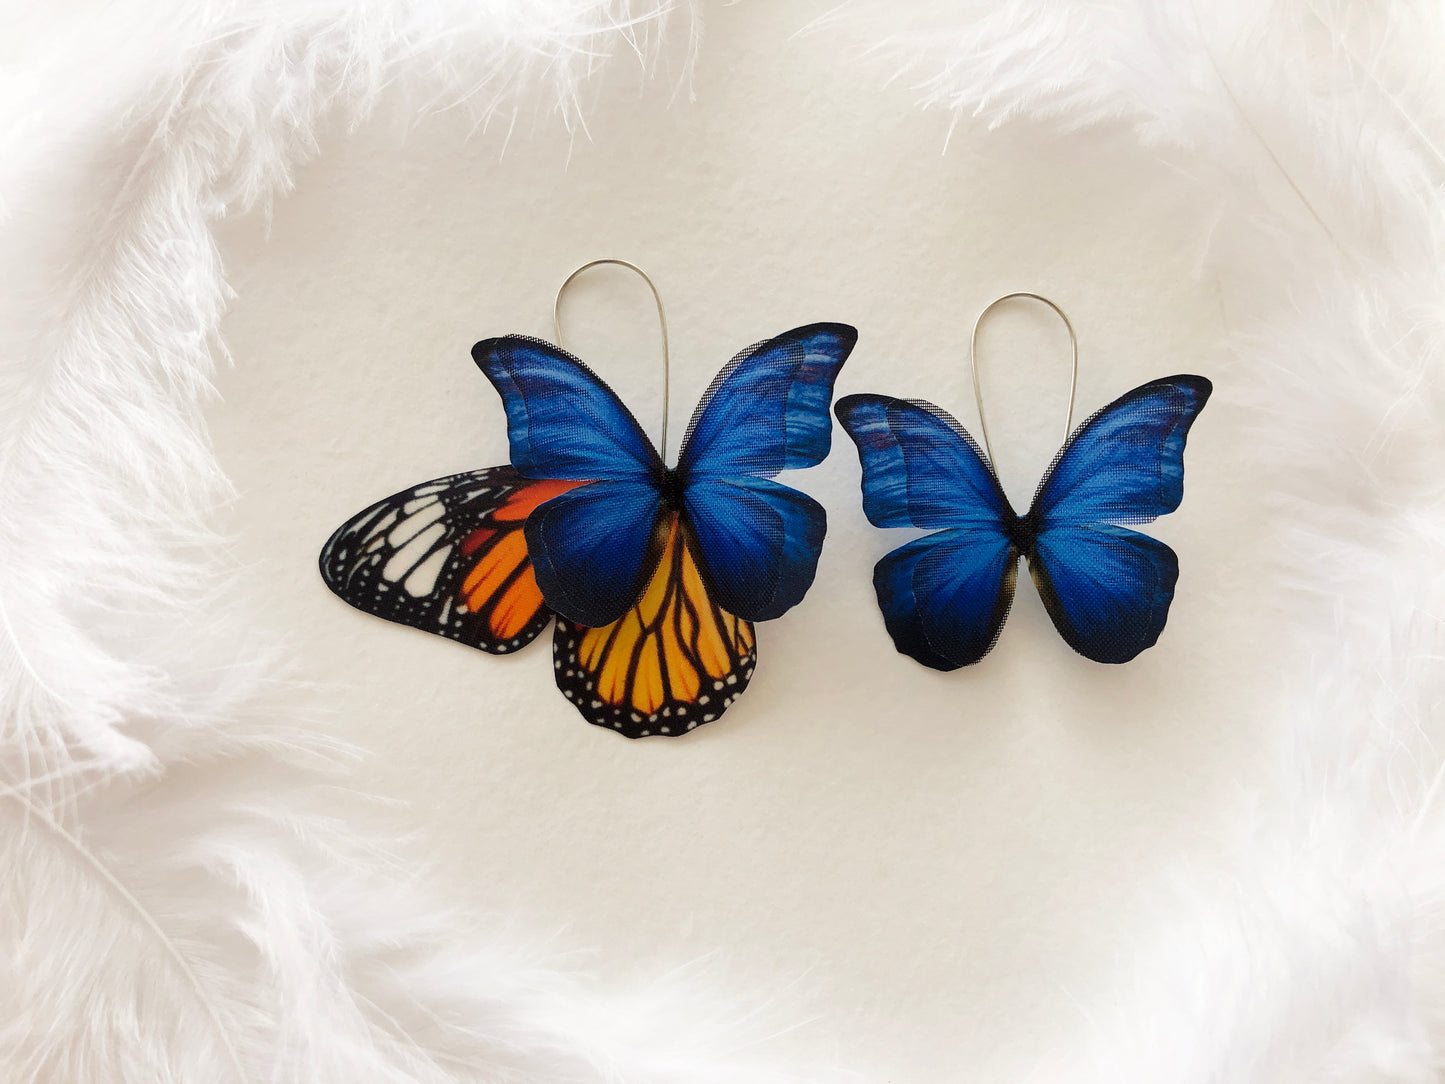 Handmade butterfly earrings with blue monarch wings and floral details